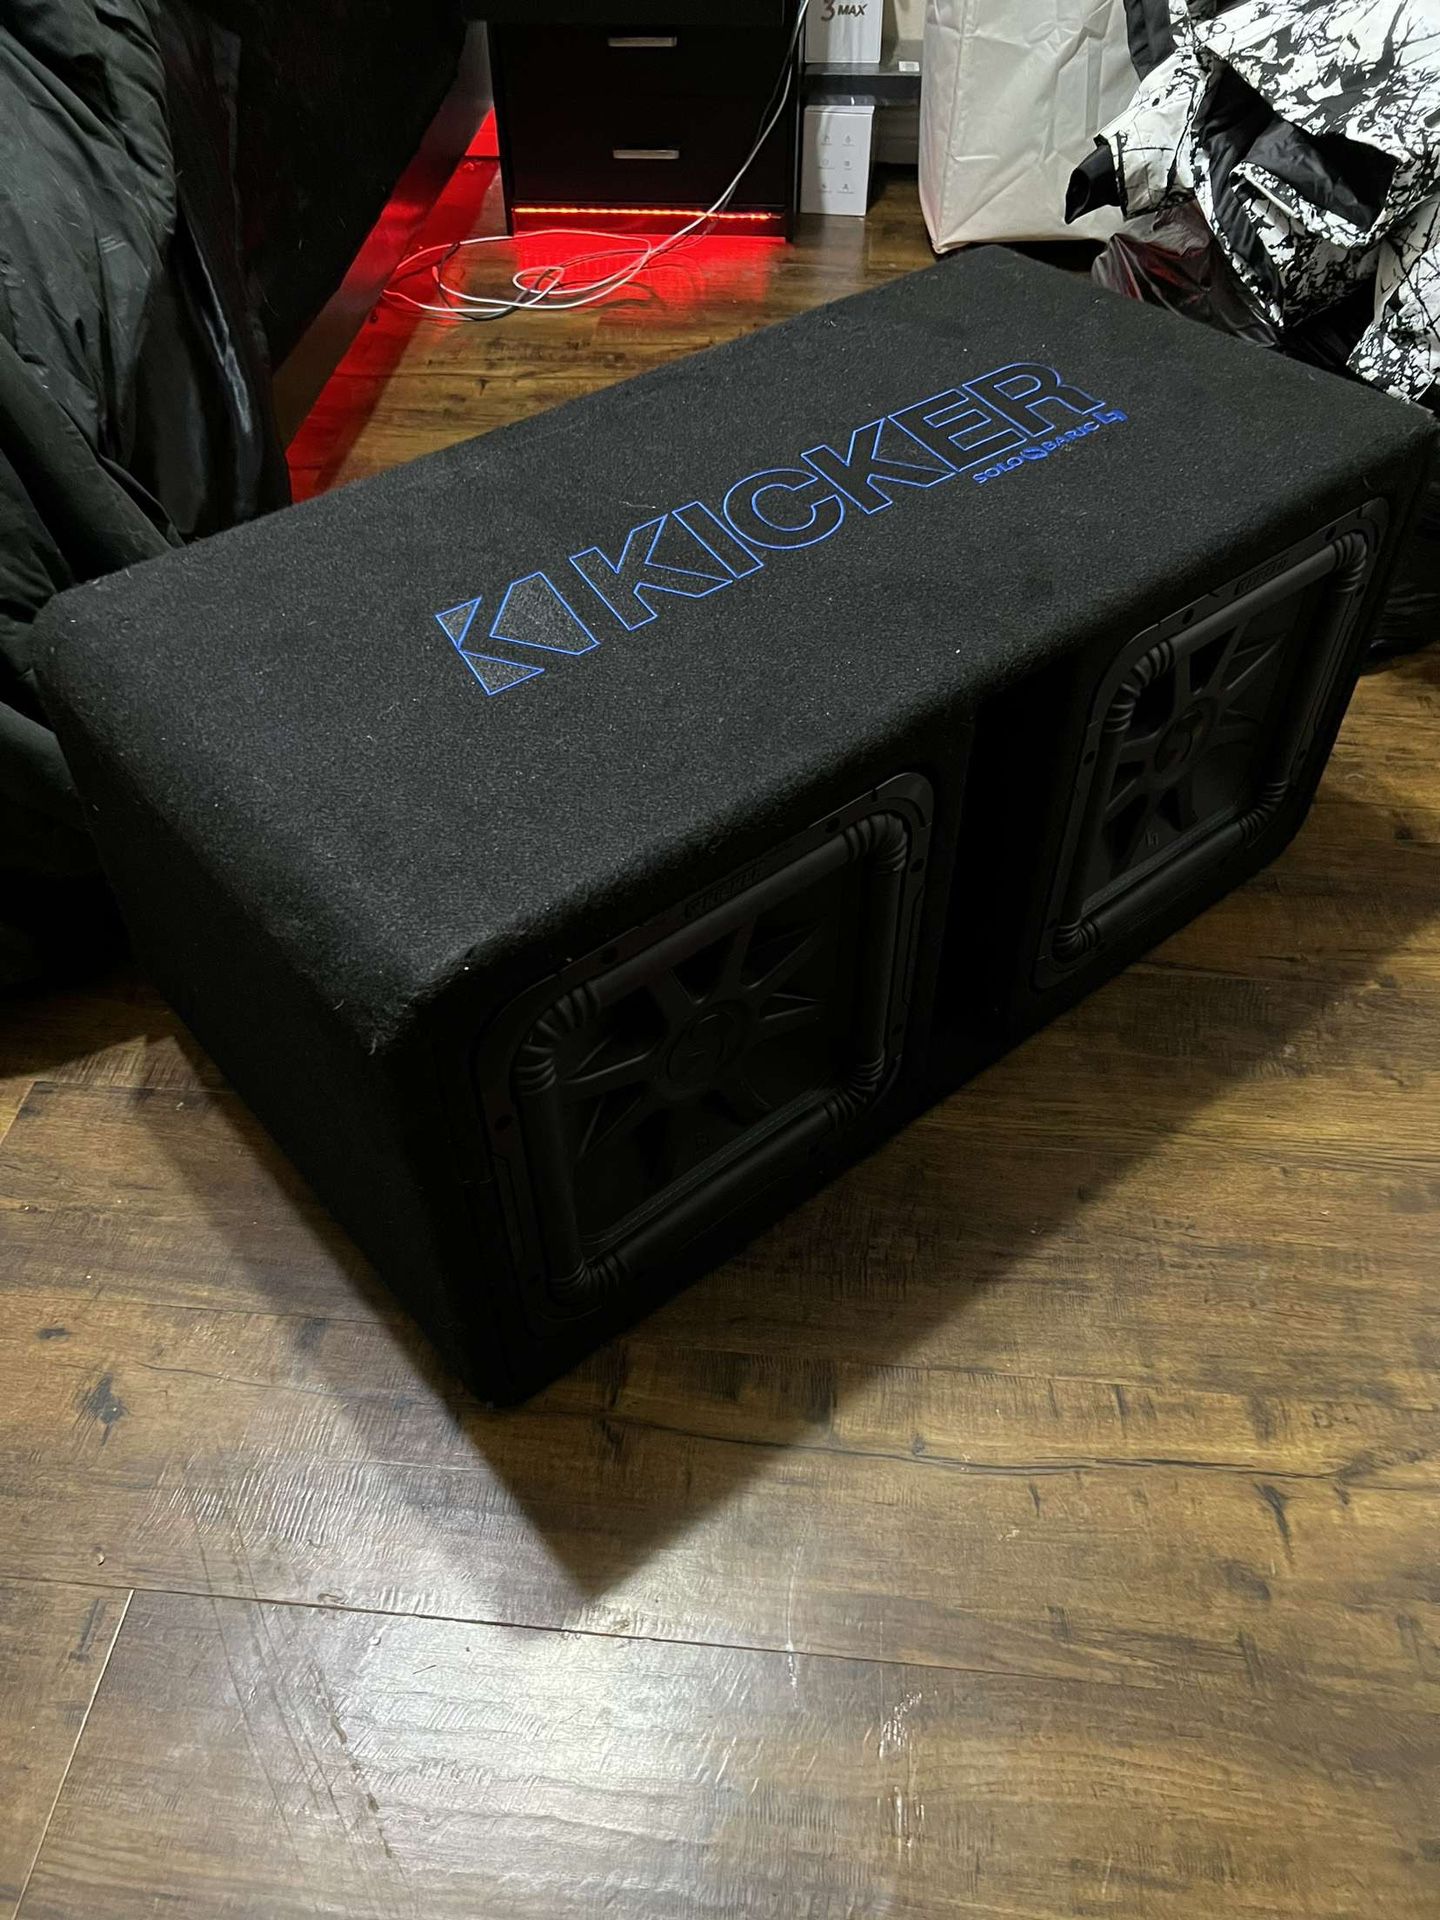 Dual 12 Inch Solo-baric L7S Kicker Subwoofer